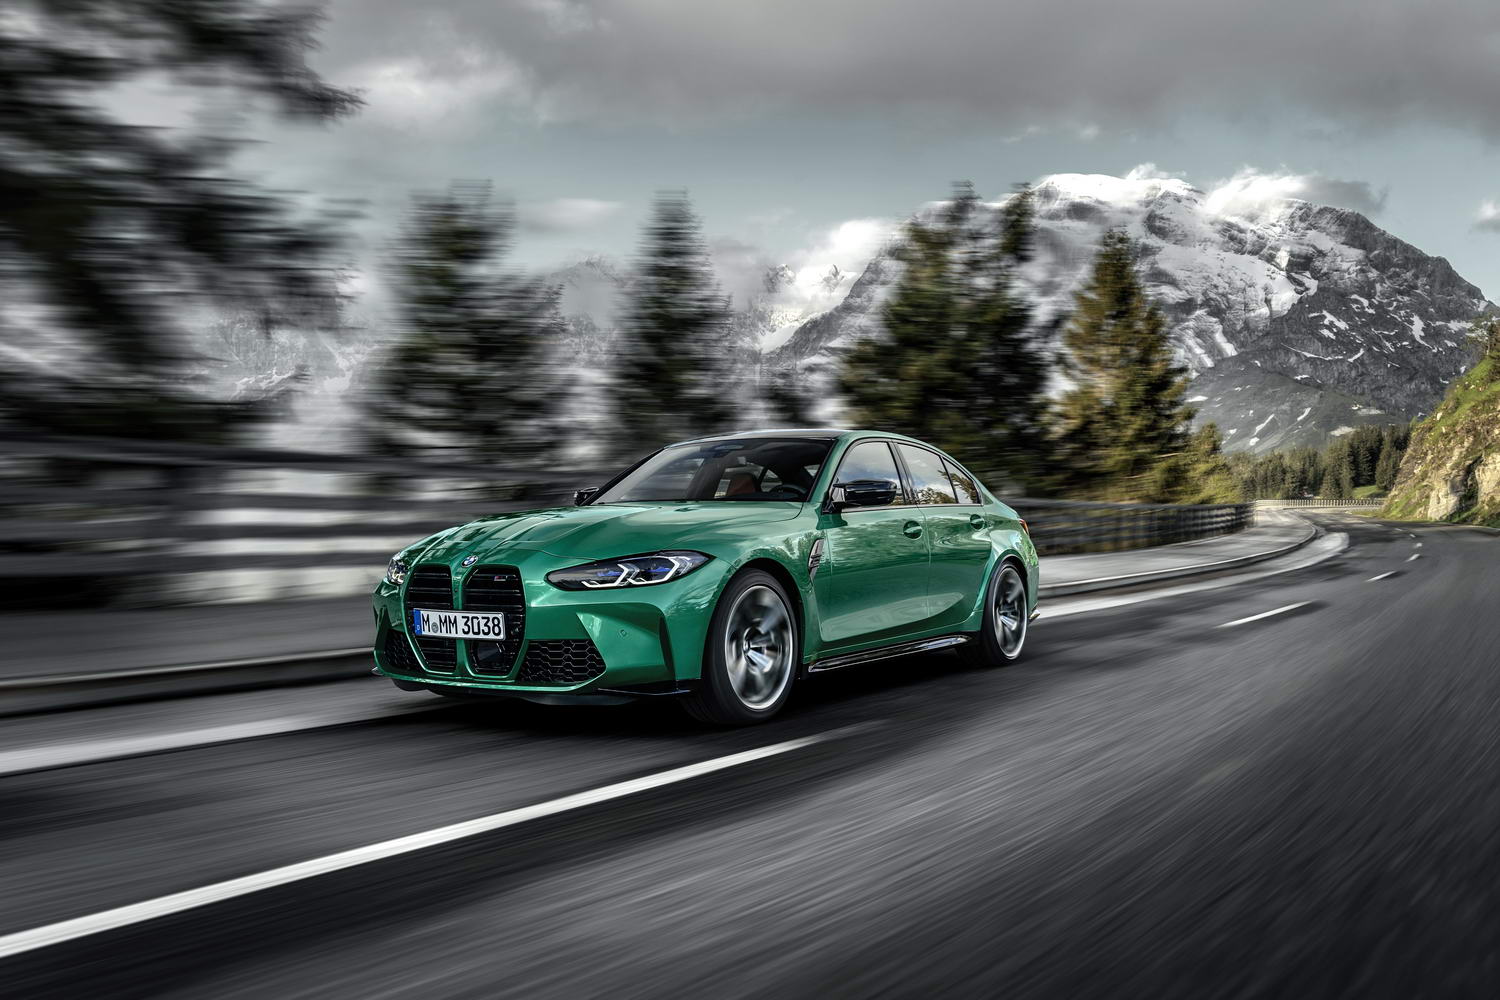 2021 BMW M3 Saloon image gallery - car and motoring news ...